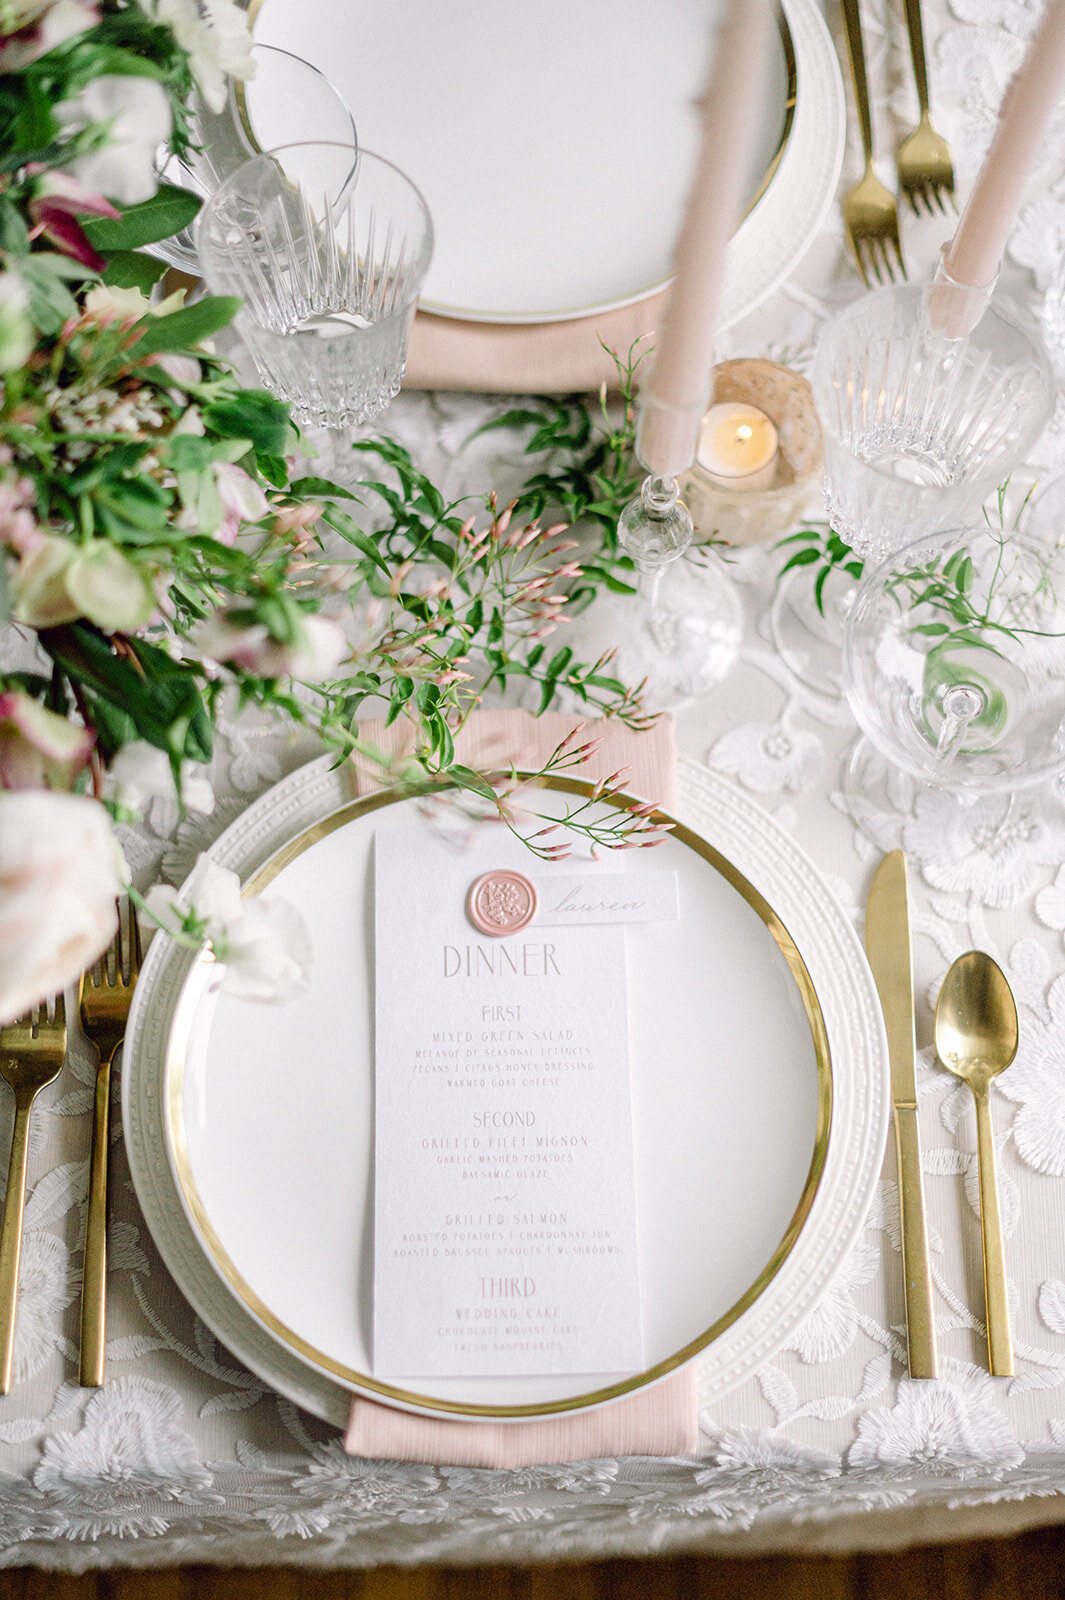 Gold and white place settings at wedding reception